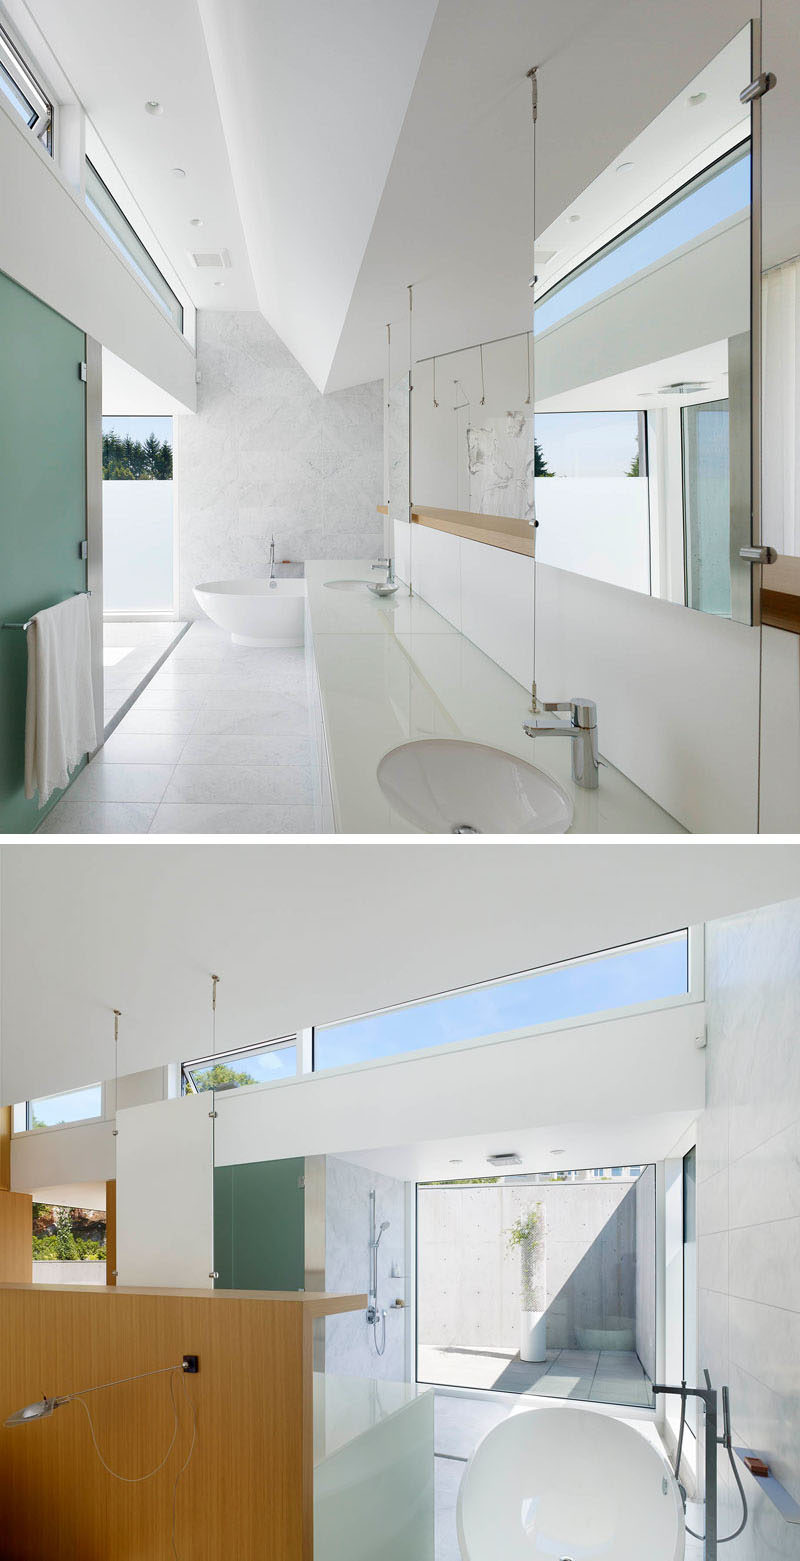 This bright white bathroom has hanging mirrors, touches of wood, and lots of natural light from the floor to ceiling window in the shower.